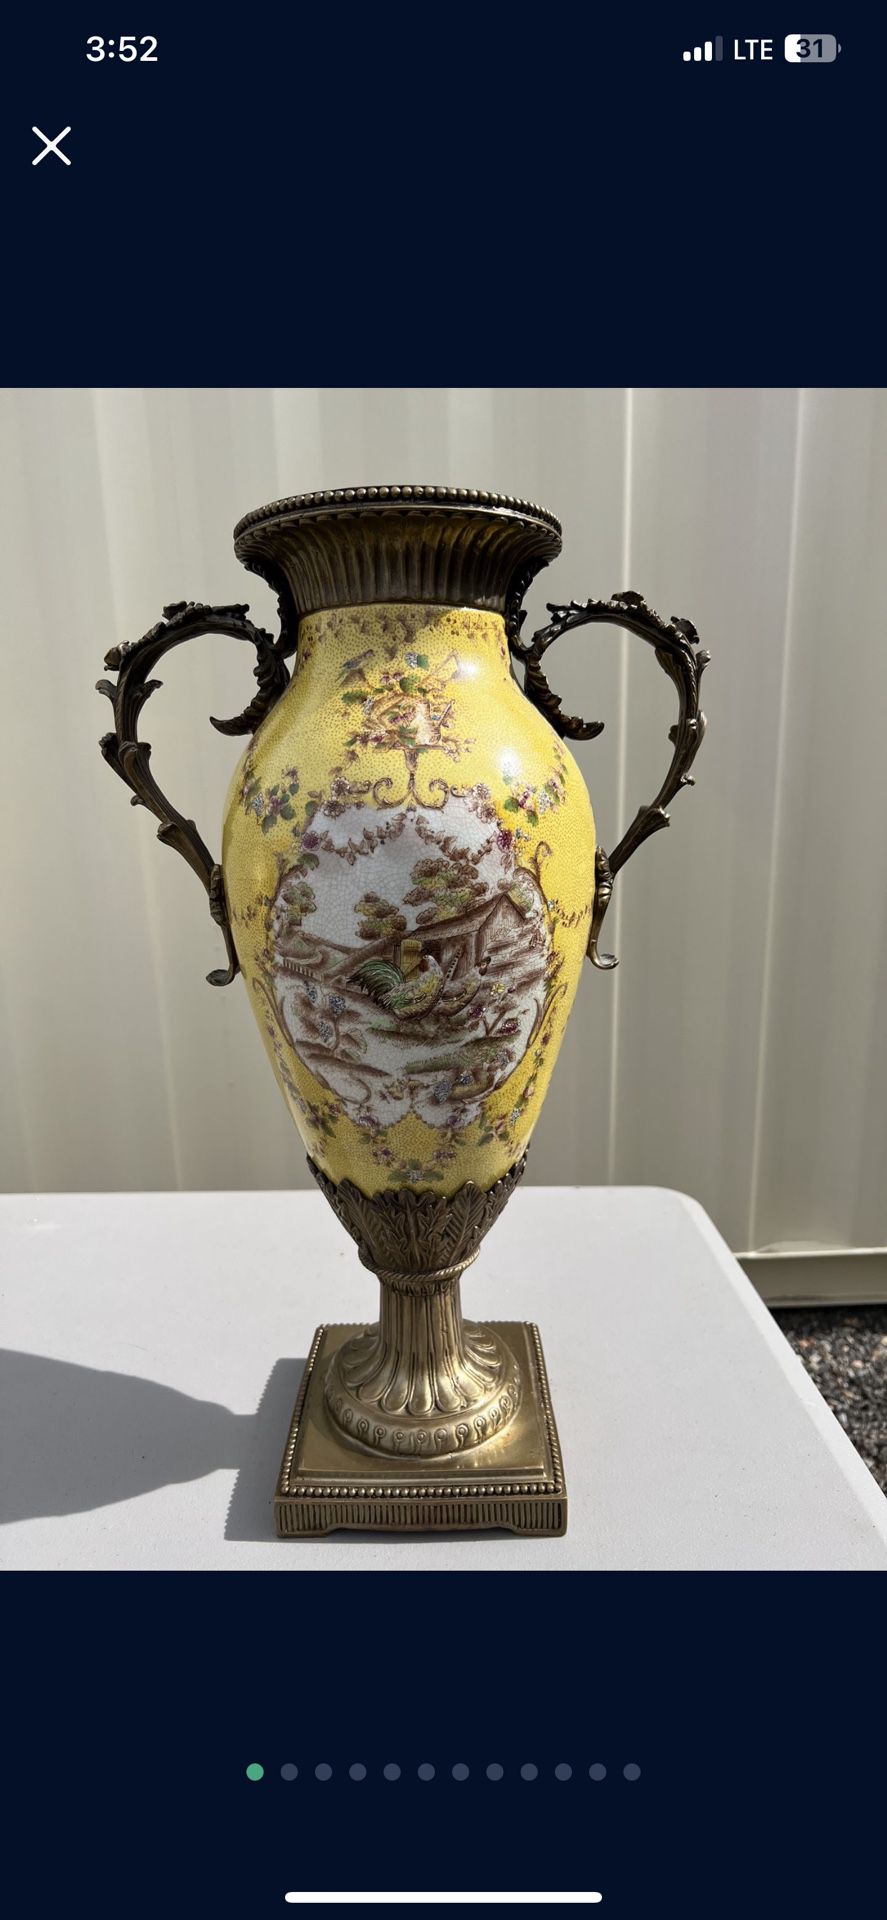 French Rooster Porcelain and Brass Ornate Vase 